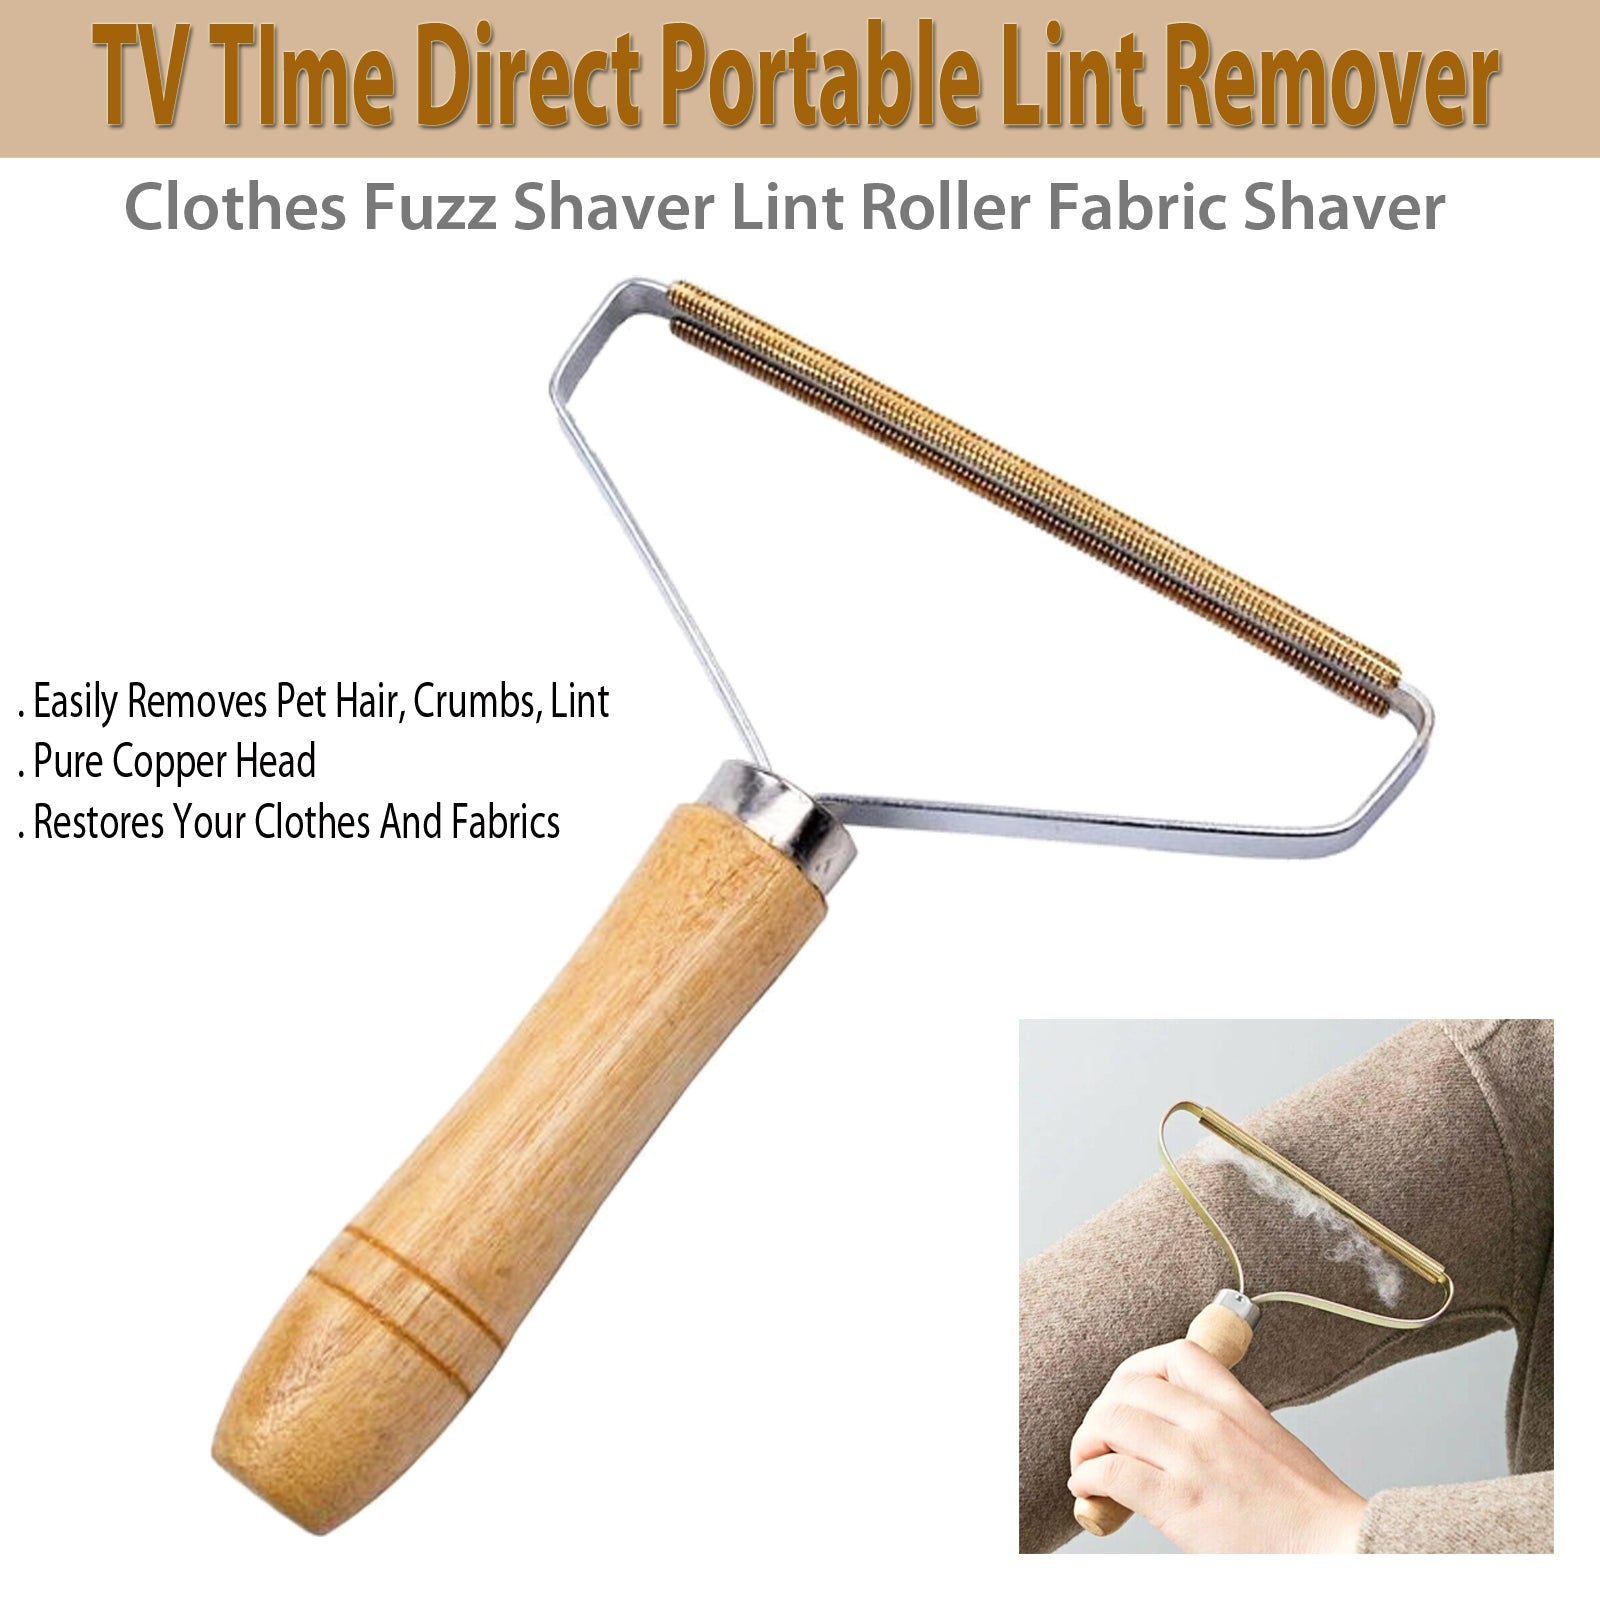 TV TIme Direct Portable- Lint Remover Fuzz Shaver Roller